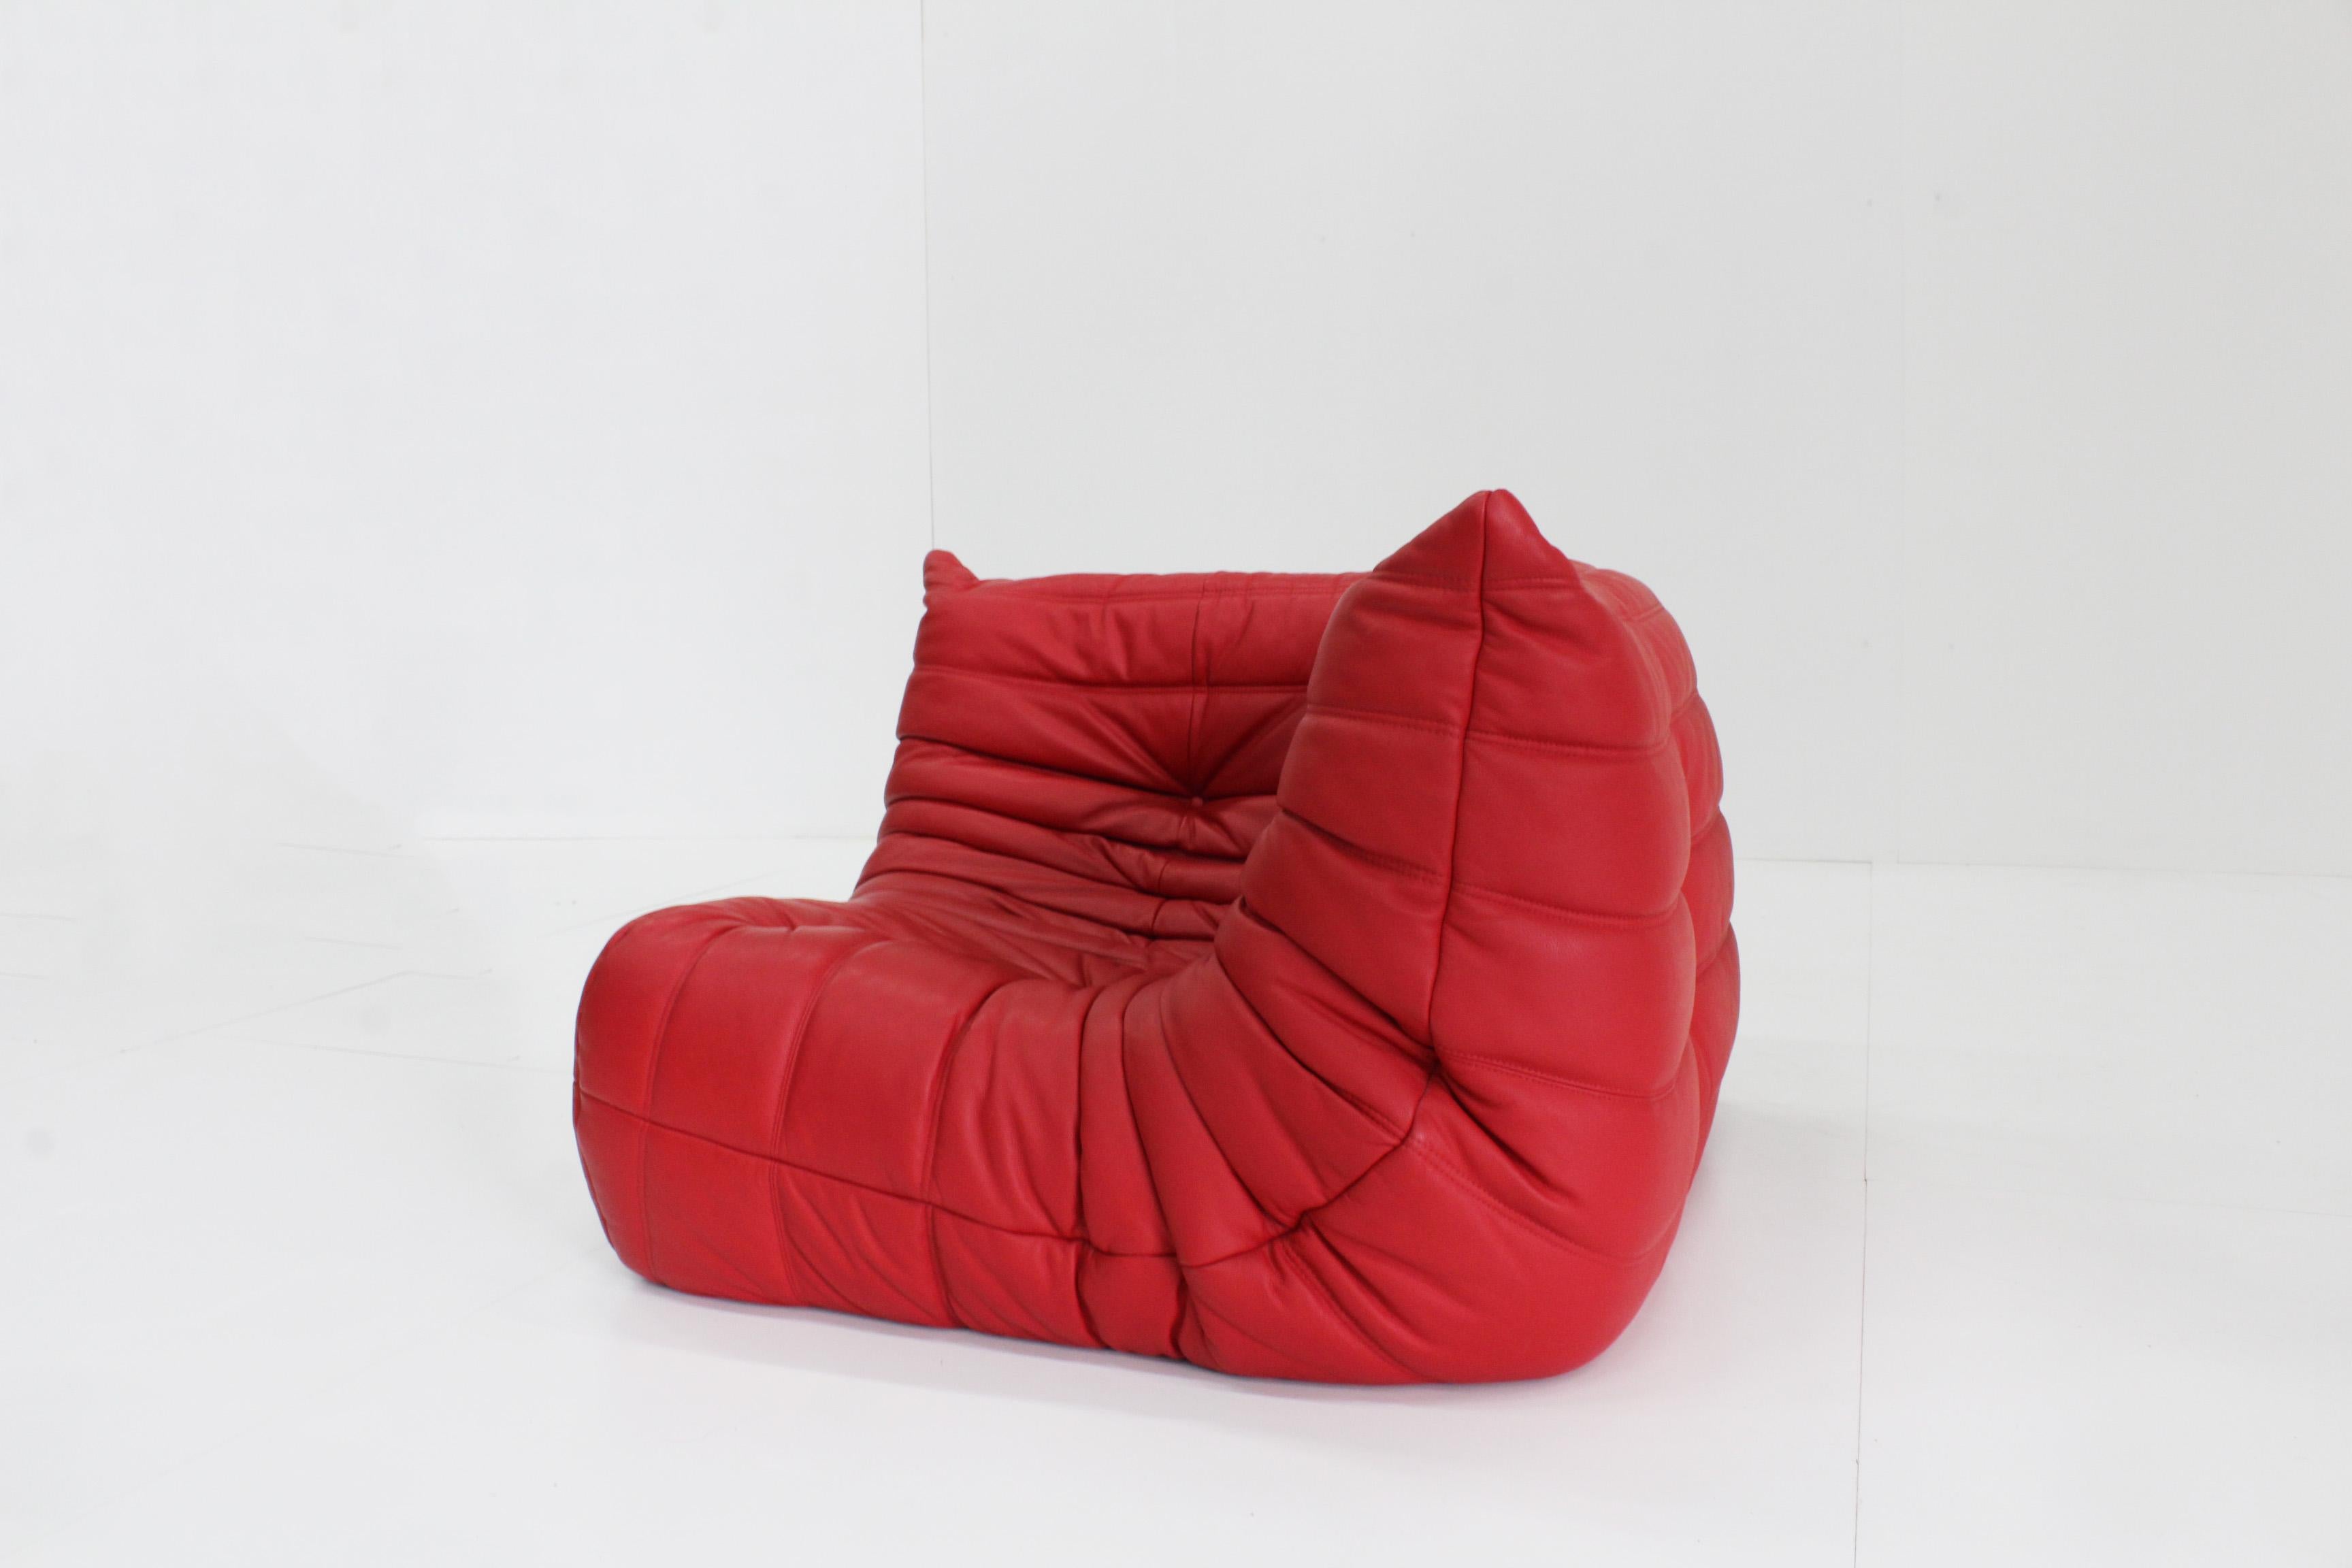 Original red leather Togo corner by Michel Ducaroy for Ligne Roset.

Original Red leather Togo sofa set from Ligne Roset by Michel Ducaroy. This is an original piece in high quality leather.